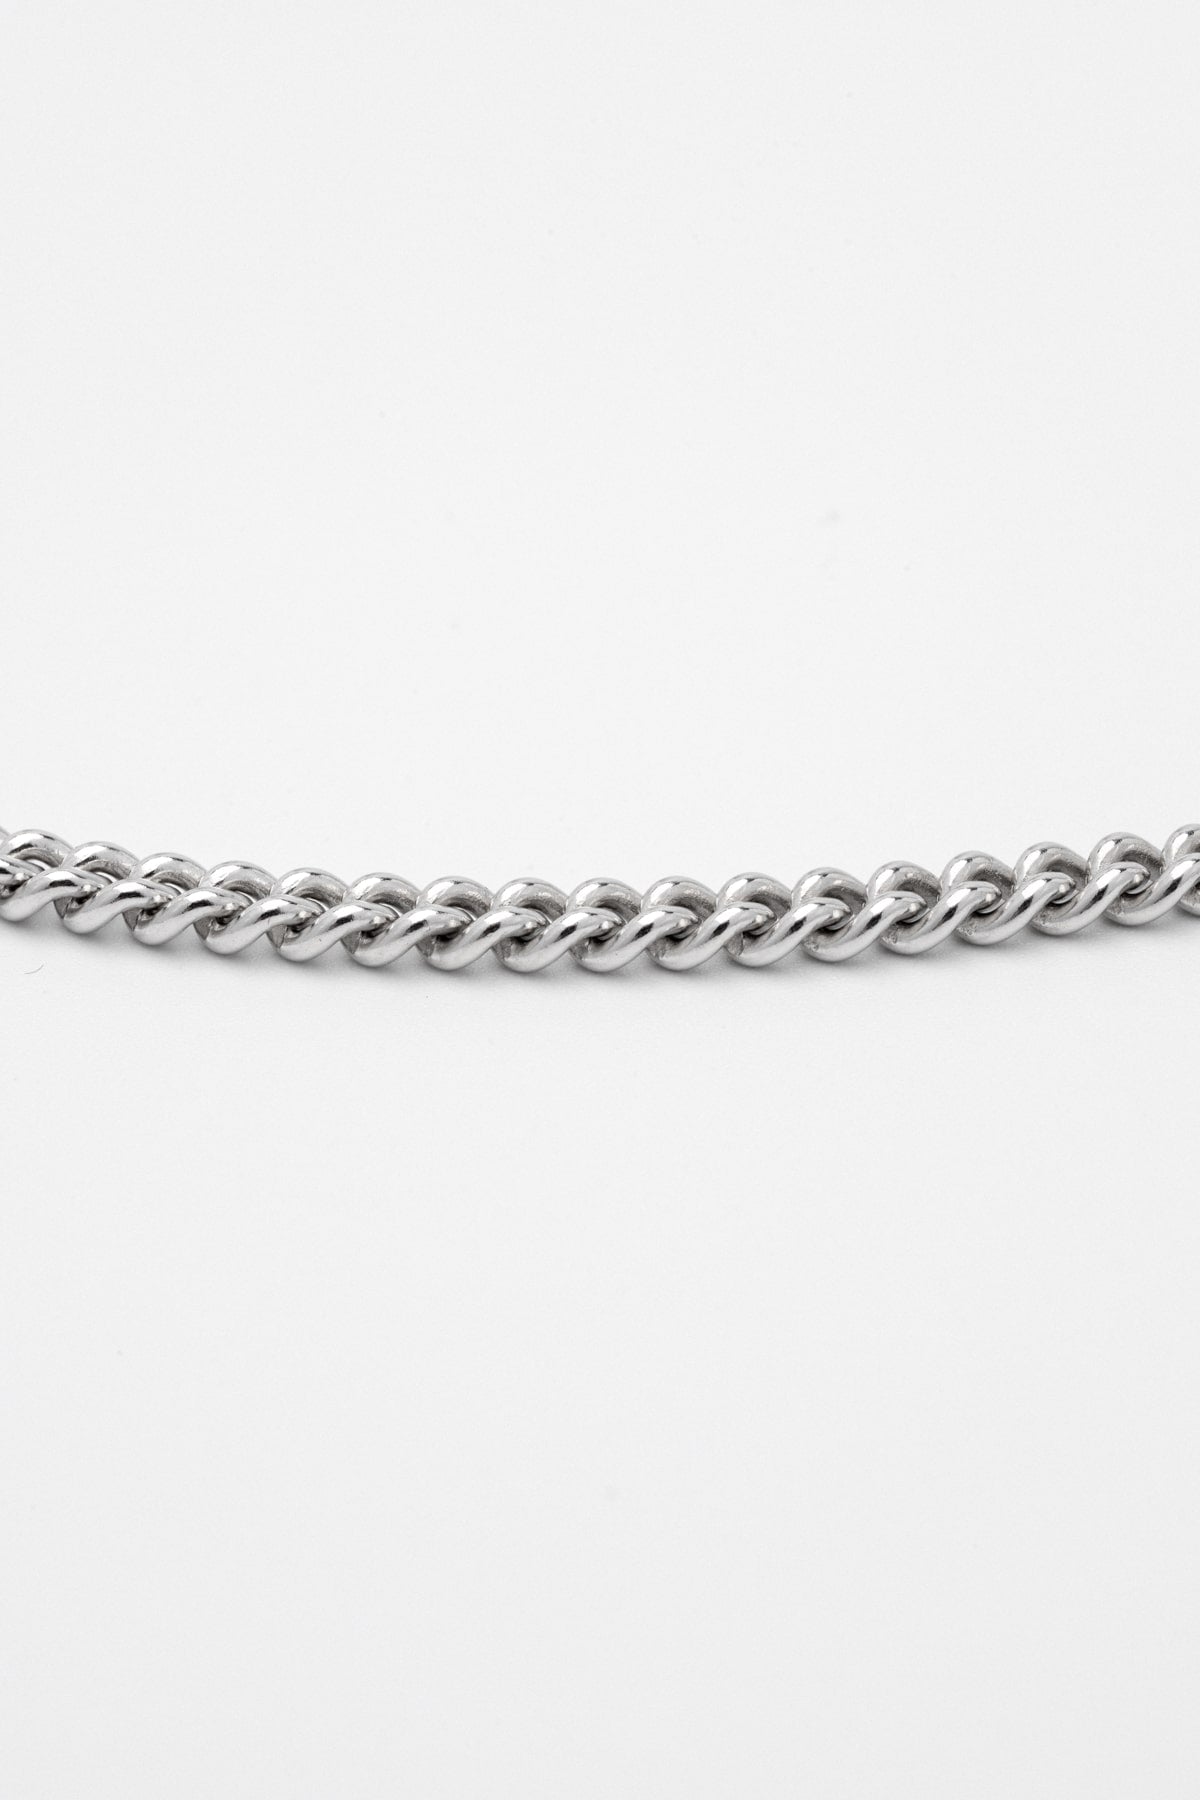 B213_Rounded Curb Chain Necklace_L_03